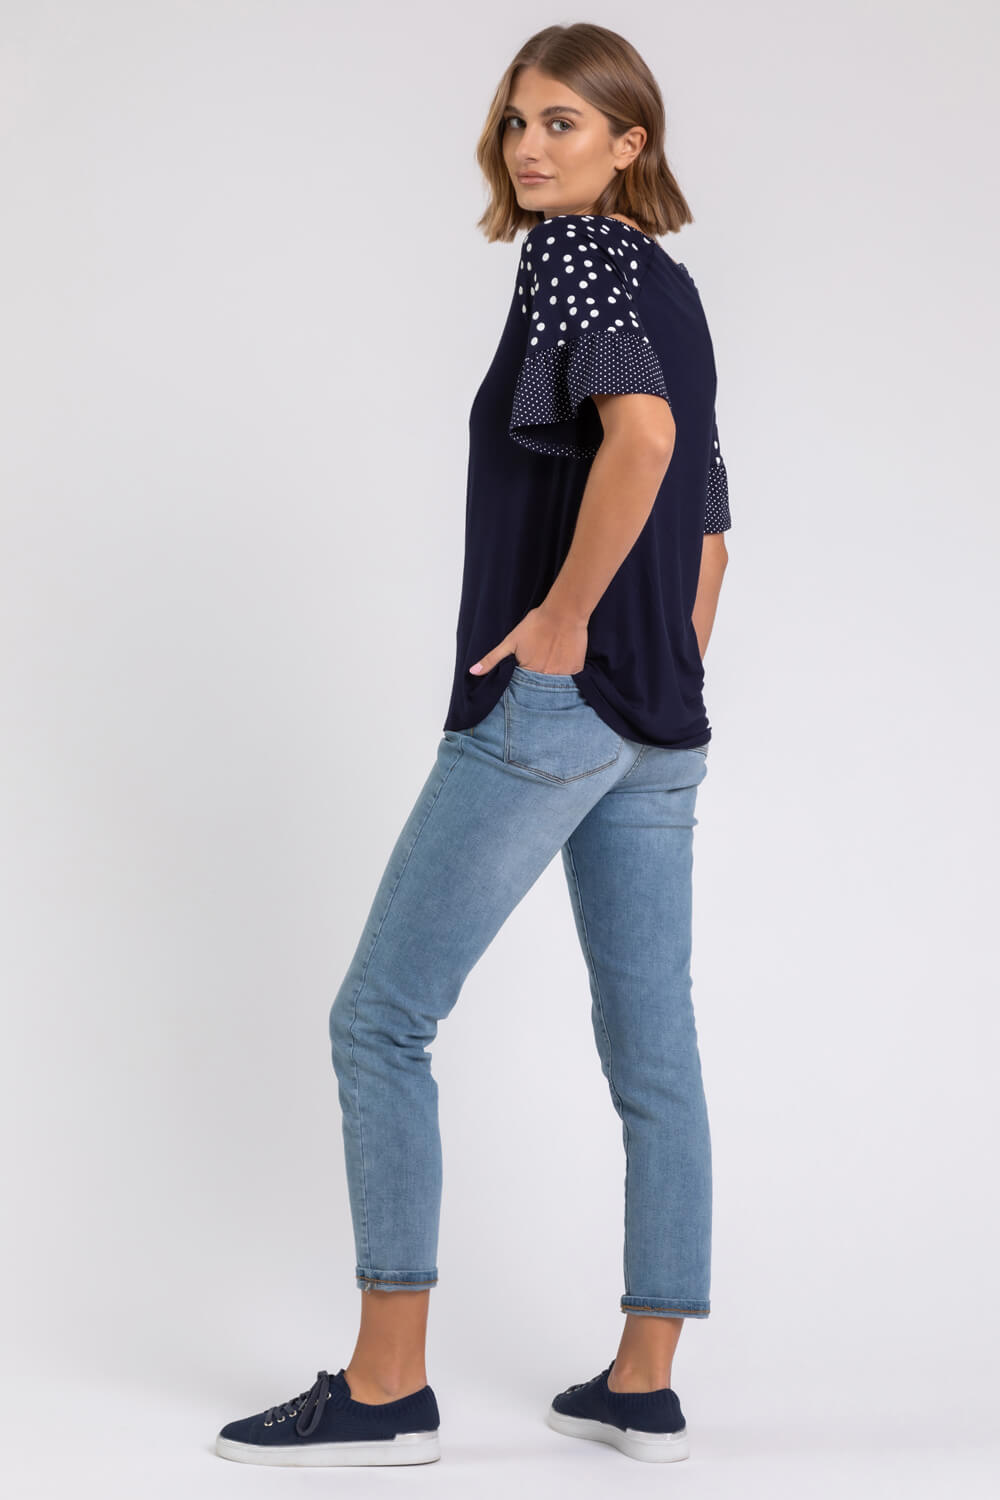 Navy  Spot Print Frill Sleeve Top, Image 2 of 5